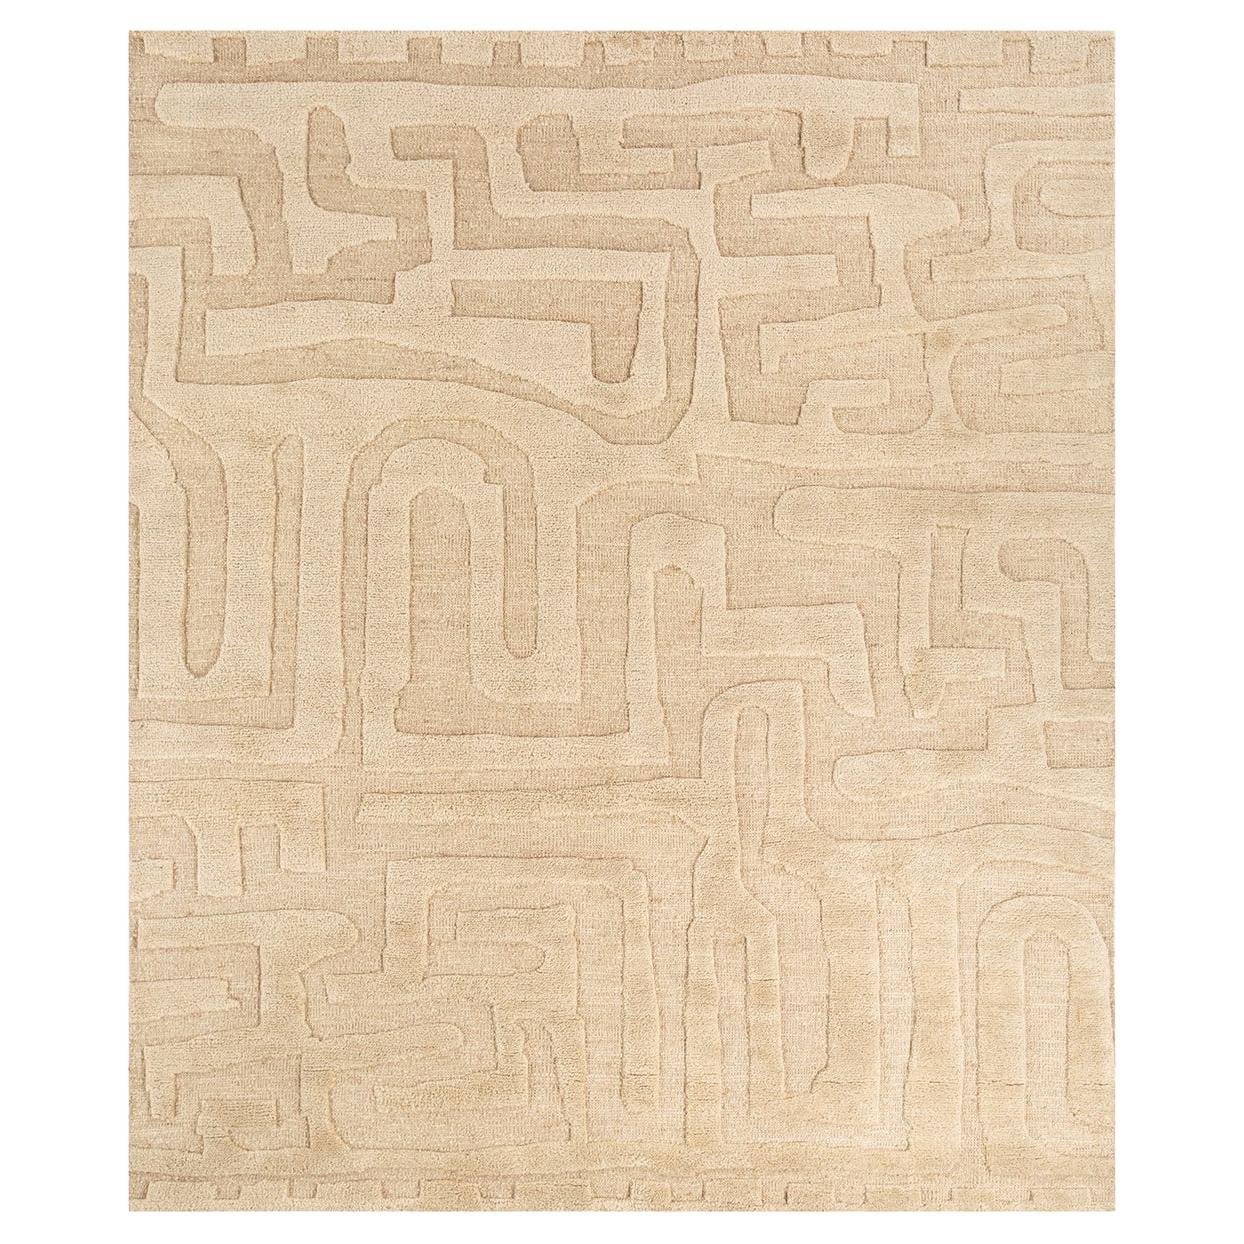 Maze Rug by Rural Weavers, Knotted, Wool, 240x300cm